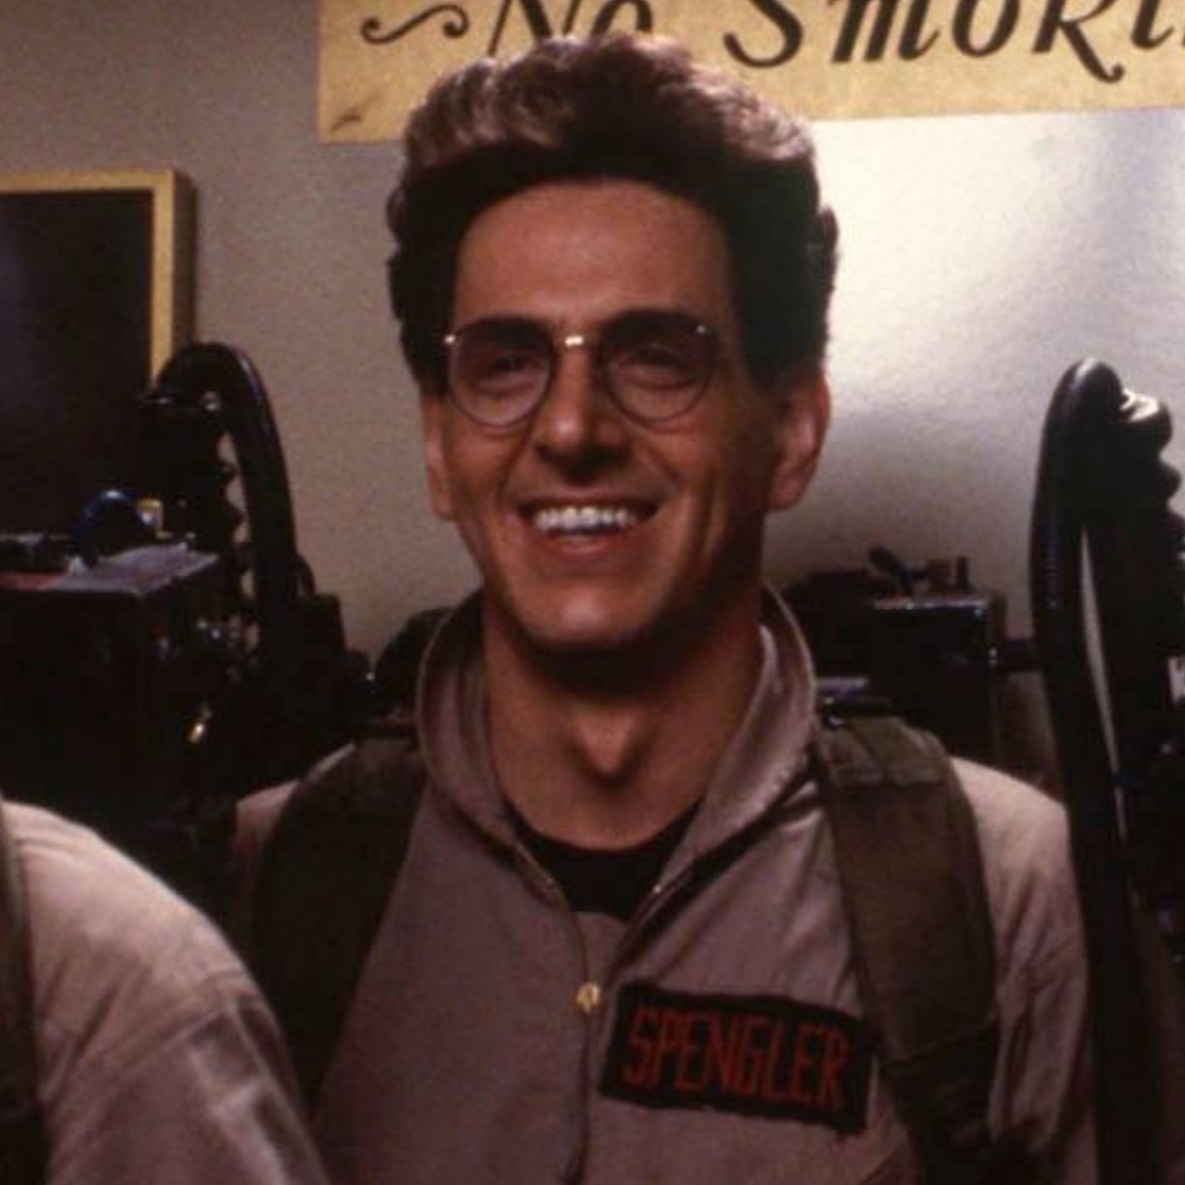 The whole world is celebrating you on your birthday this weekend. Thank you for everything, Harold.

#HaroldRamis #EgonSpengler #Ghostbusters #Ghostbusters2 #GhostbustersAfterlife #Spengler #PhoebeSpengler #TrevorSpengler #CallieSpengler #Birthday #ForHarold